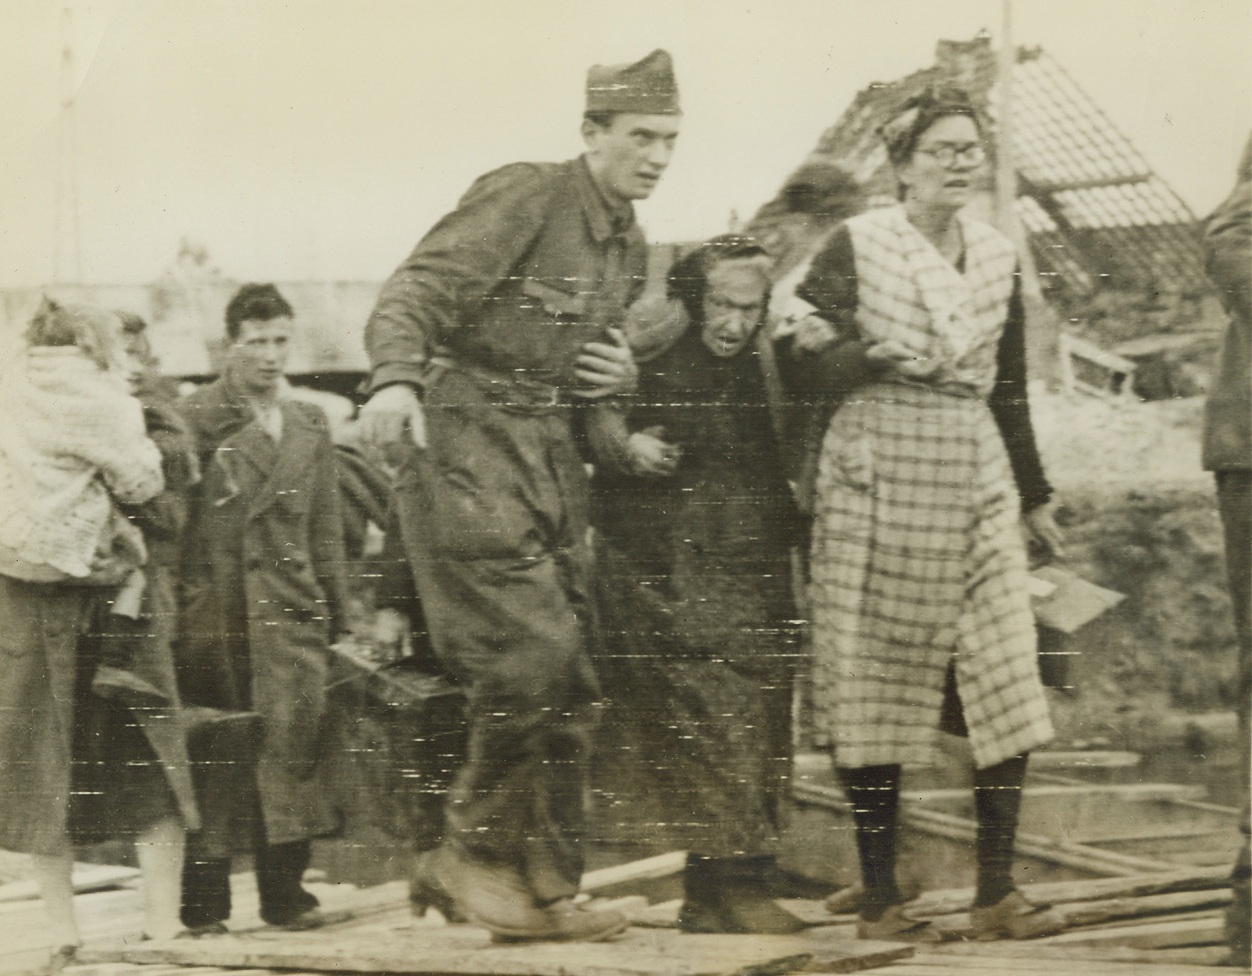 EVACUATION UNDER THE WHITE FLAG, 10/2/1944. CALAIS, FRANCE – With the guns of war temporarily silenced, an aged woman of Calais makes her way from that city during the 24-hour truce.  An FFI man and a Red Cross volunteer help her to cross Calais canal.  Shortly after the truce ended, Canadian troops captured the city.Credit: Acme photo via Army radio telephoto;